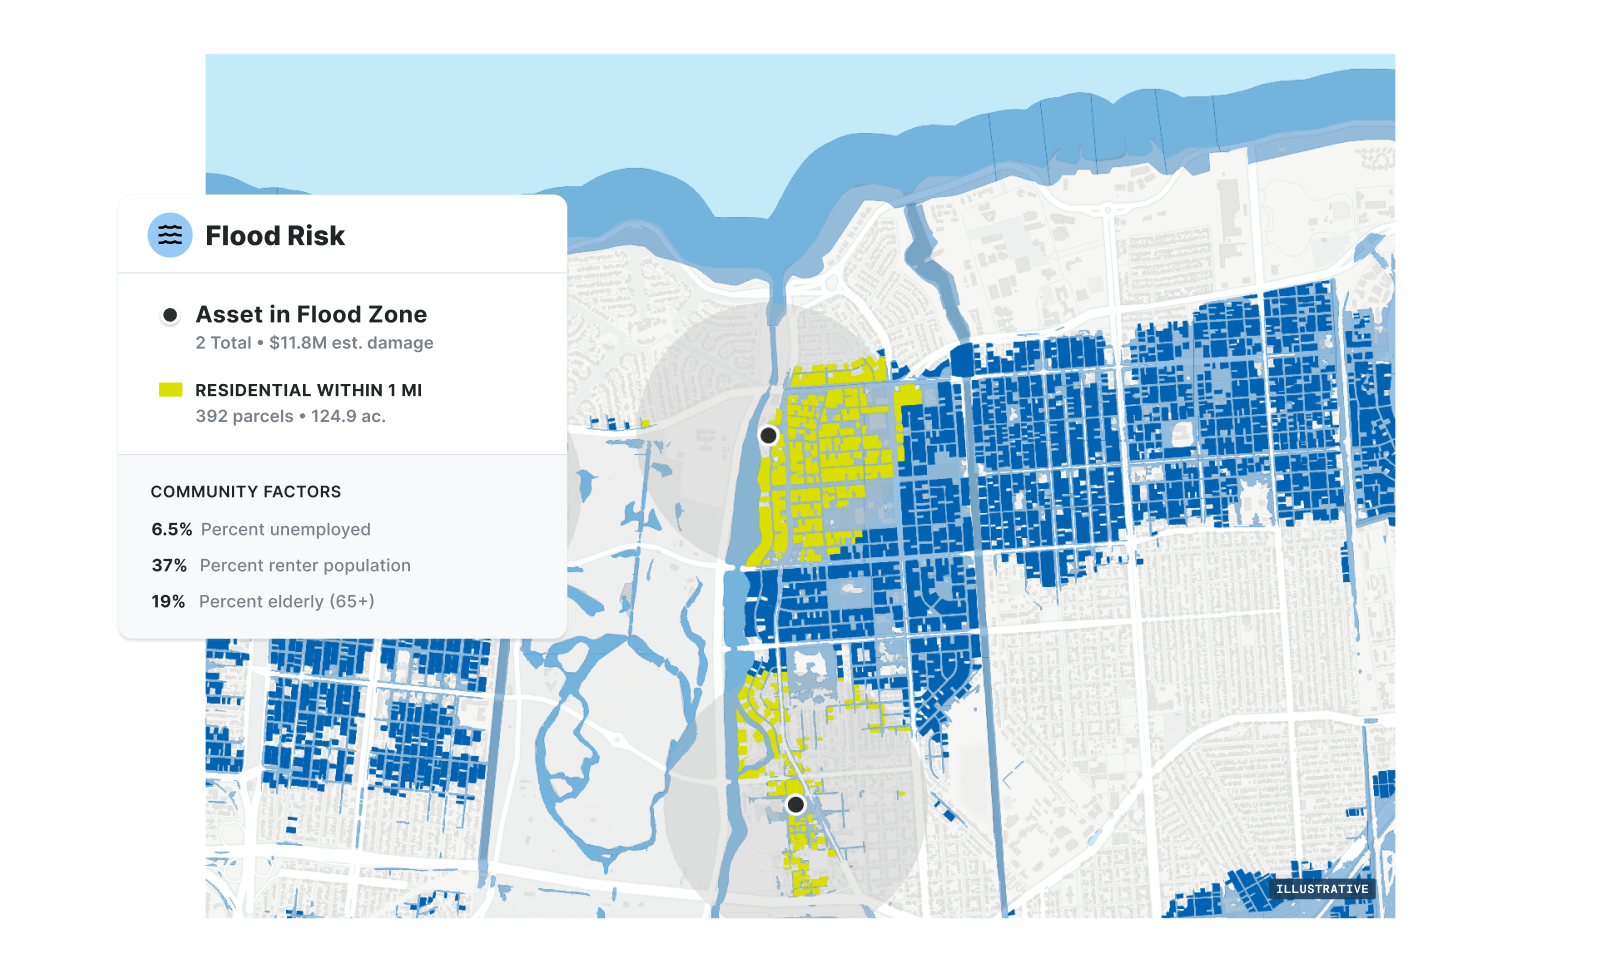 Map showing residential areas along the coast in a flood risk zone